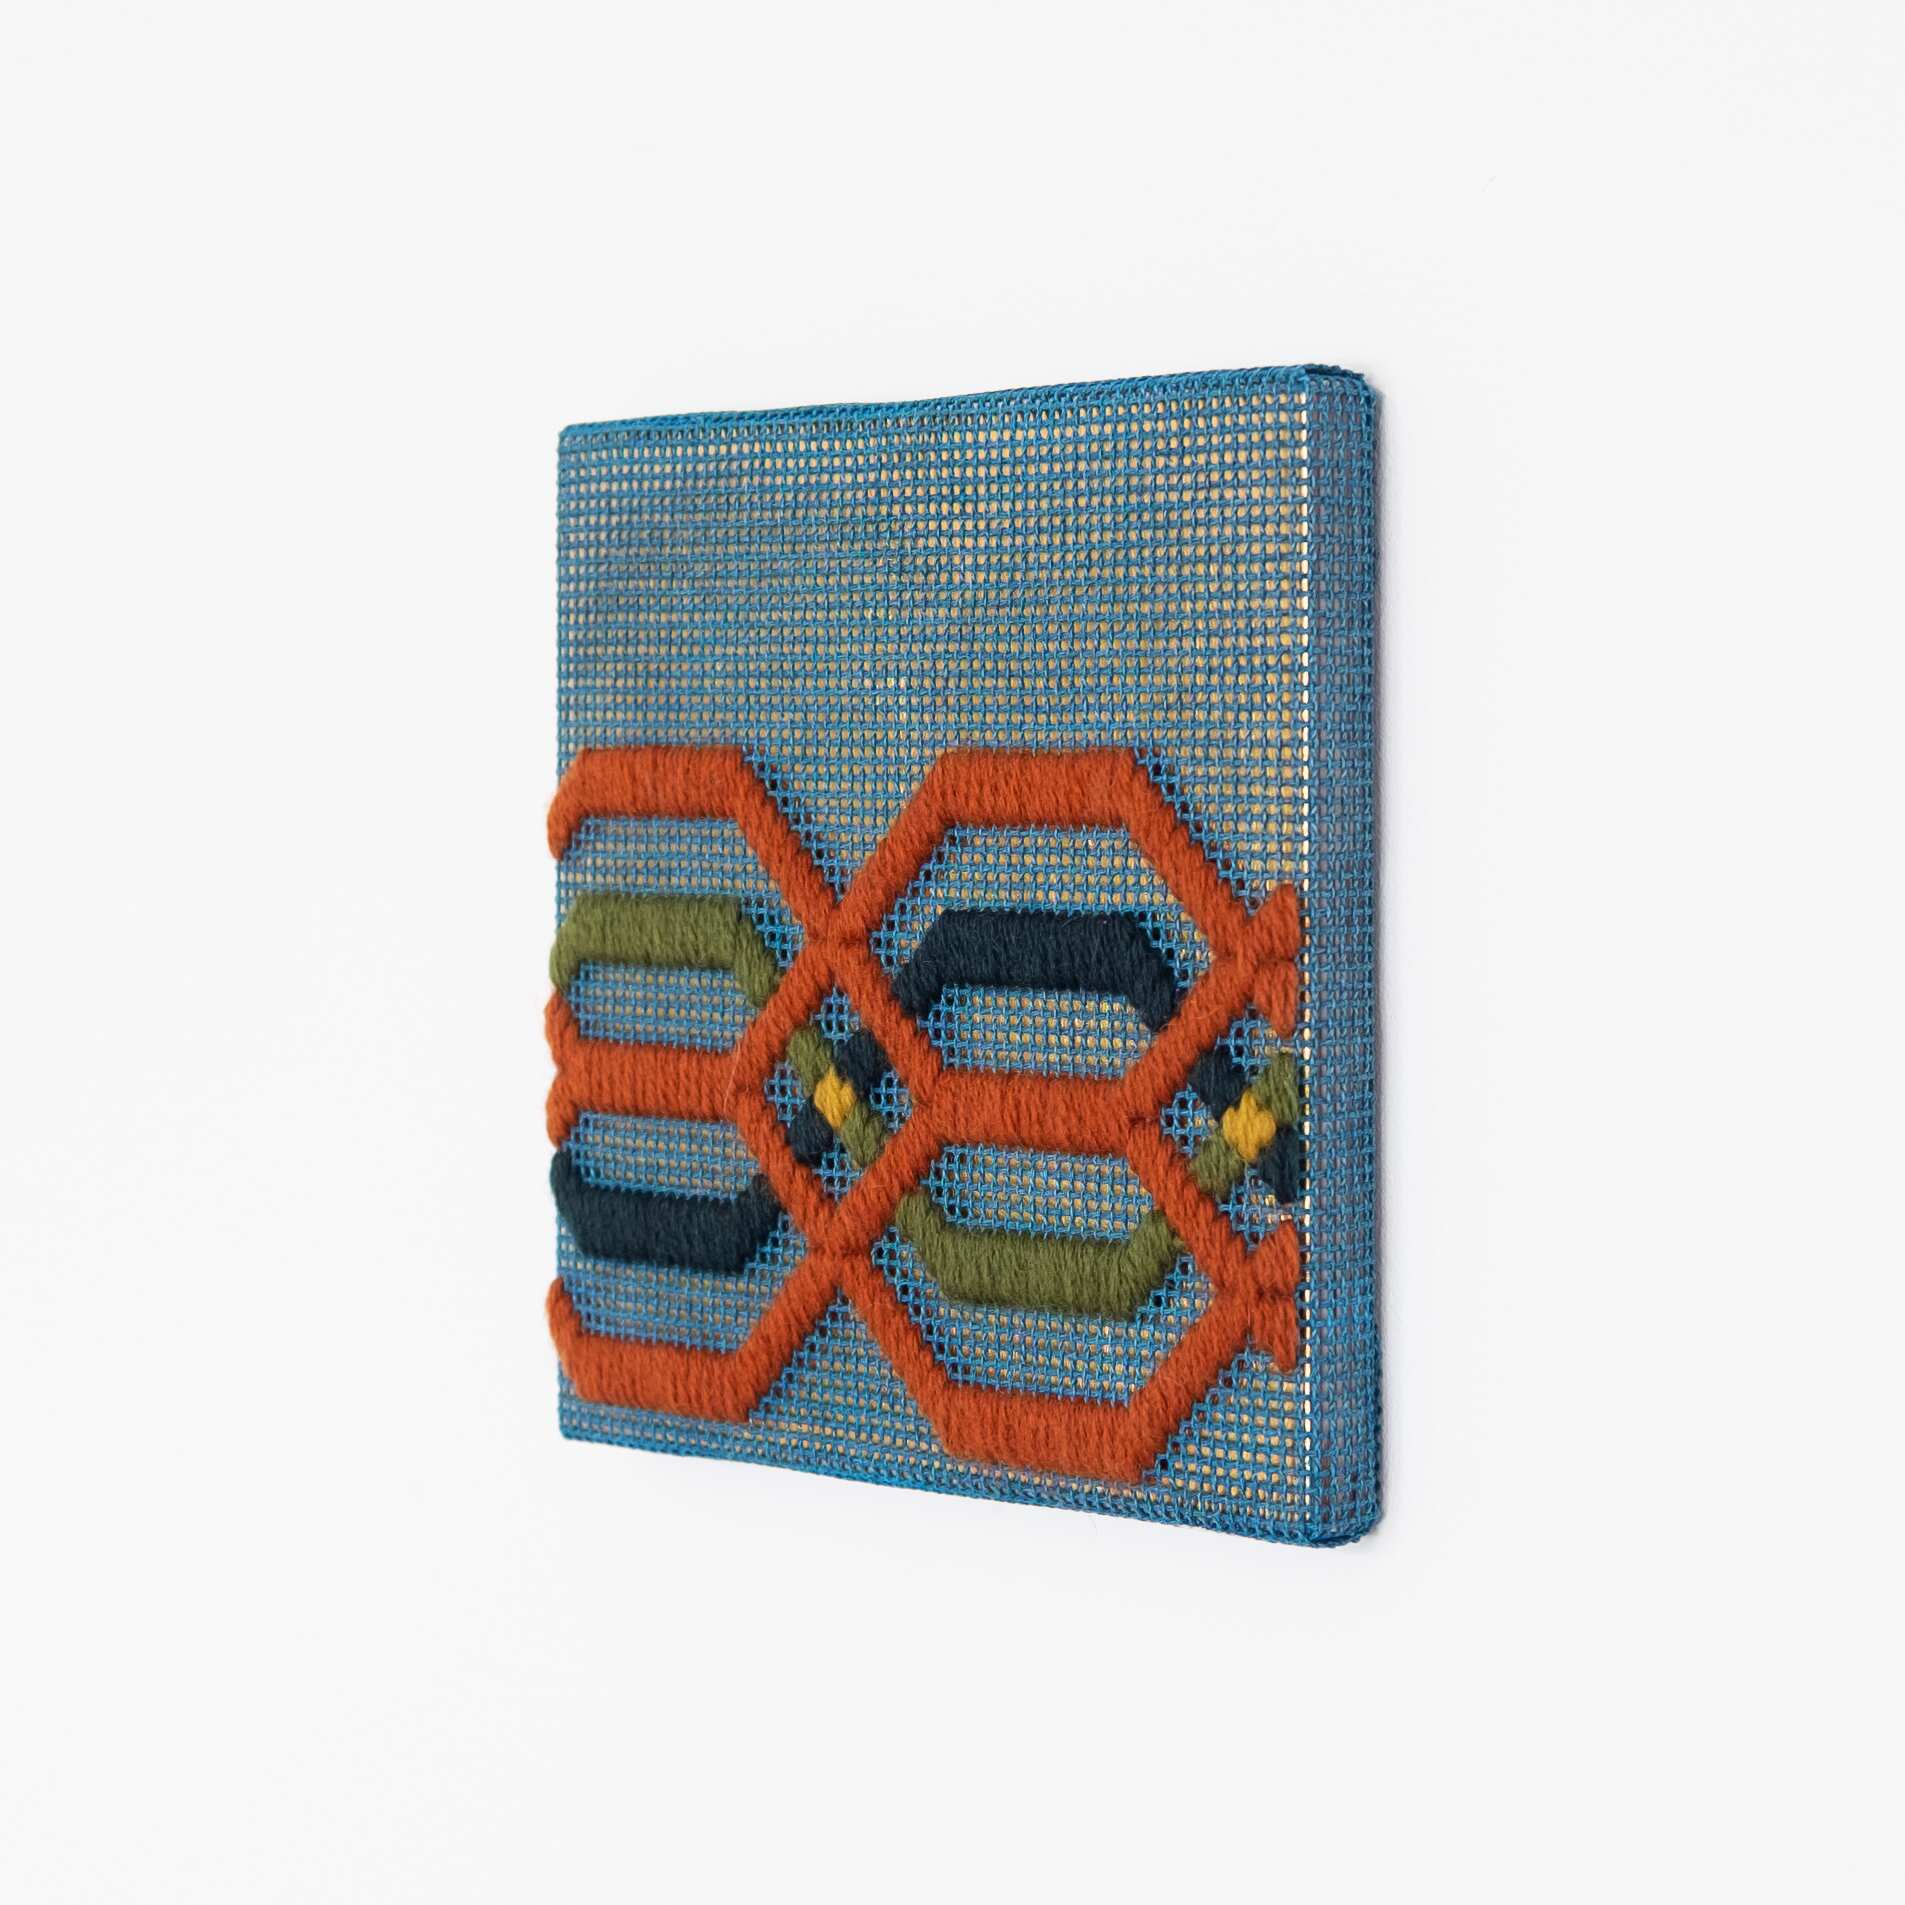 Border fragment [rust-green-blue on blue], Hand-embroidered wool thread and acrylic paint on canvas over gilded panel, 2021